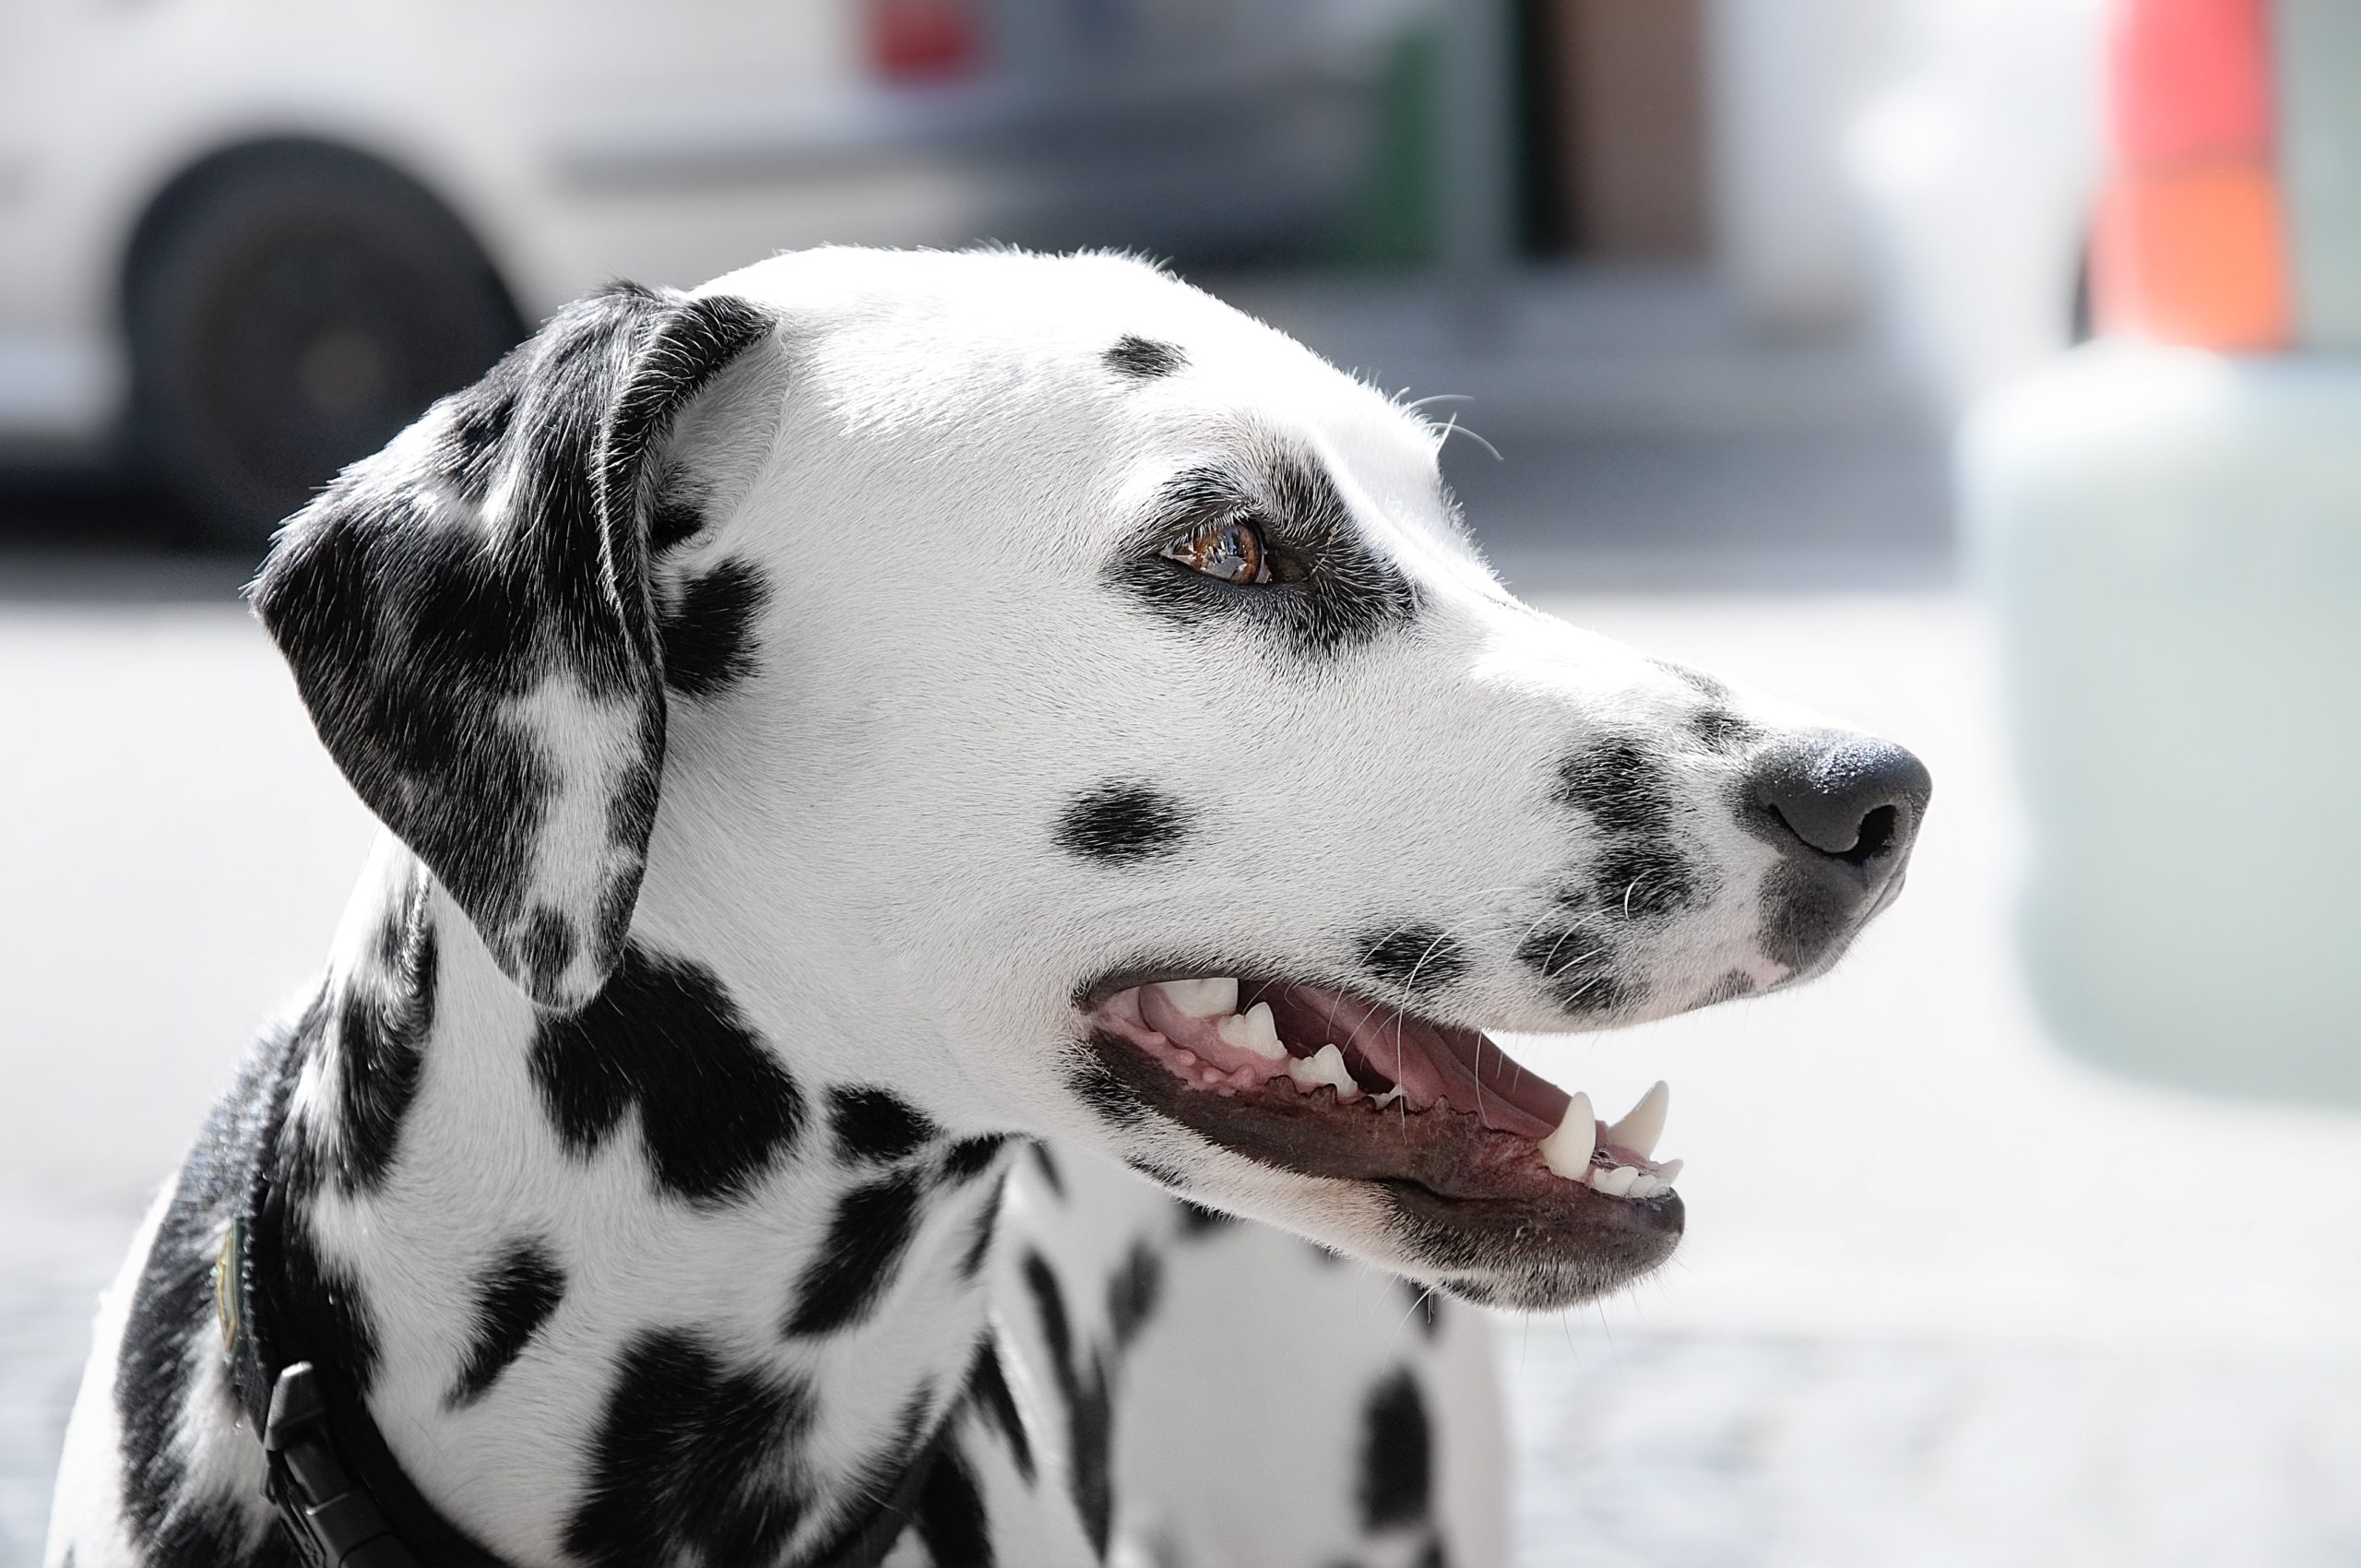 Here's why Dalmatians make a great companion, like the one pondering with its mouth open here.